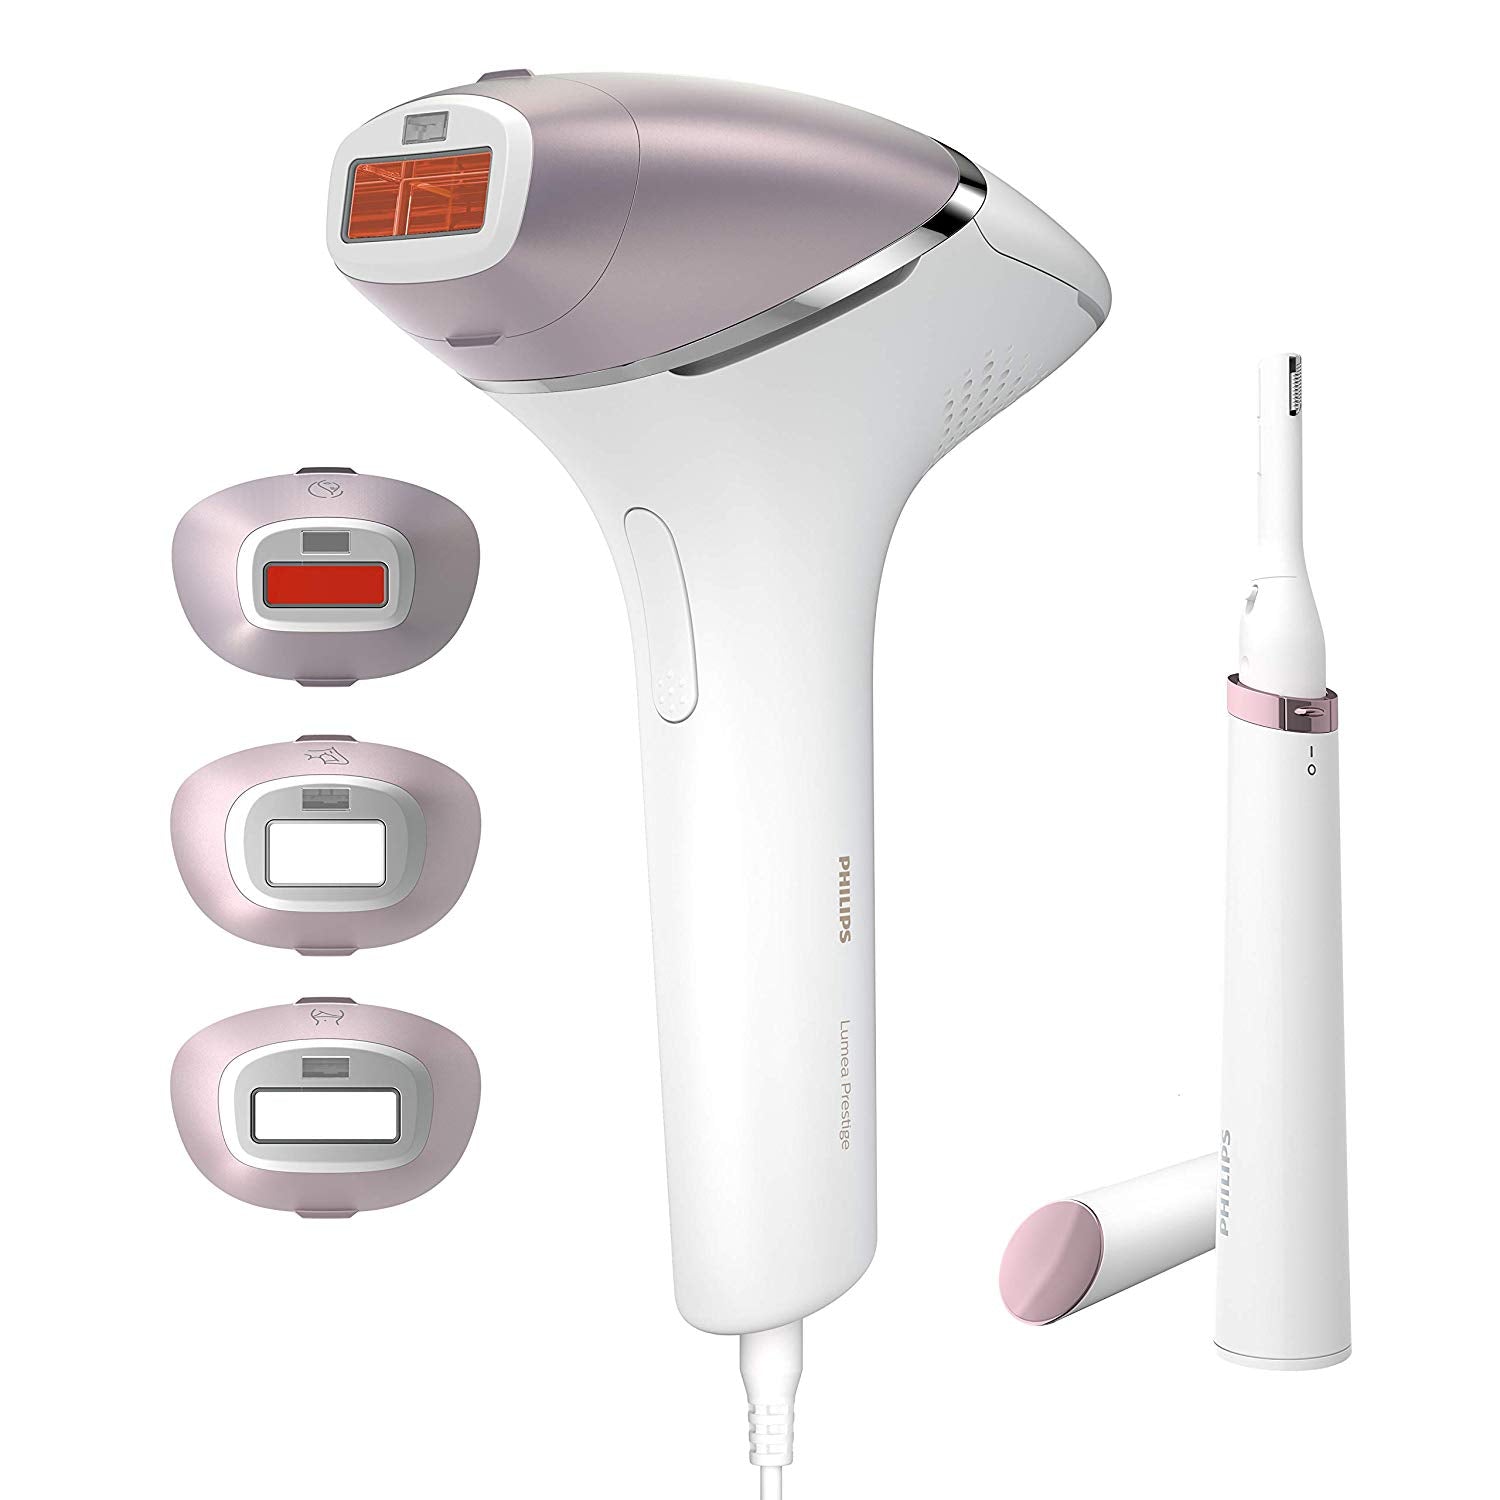 Philips BRI977/00 Cordless 9900 Series IPL Hair Removal with